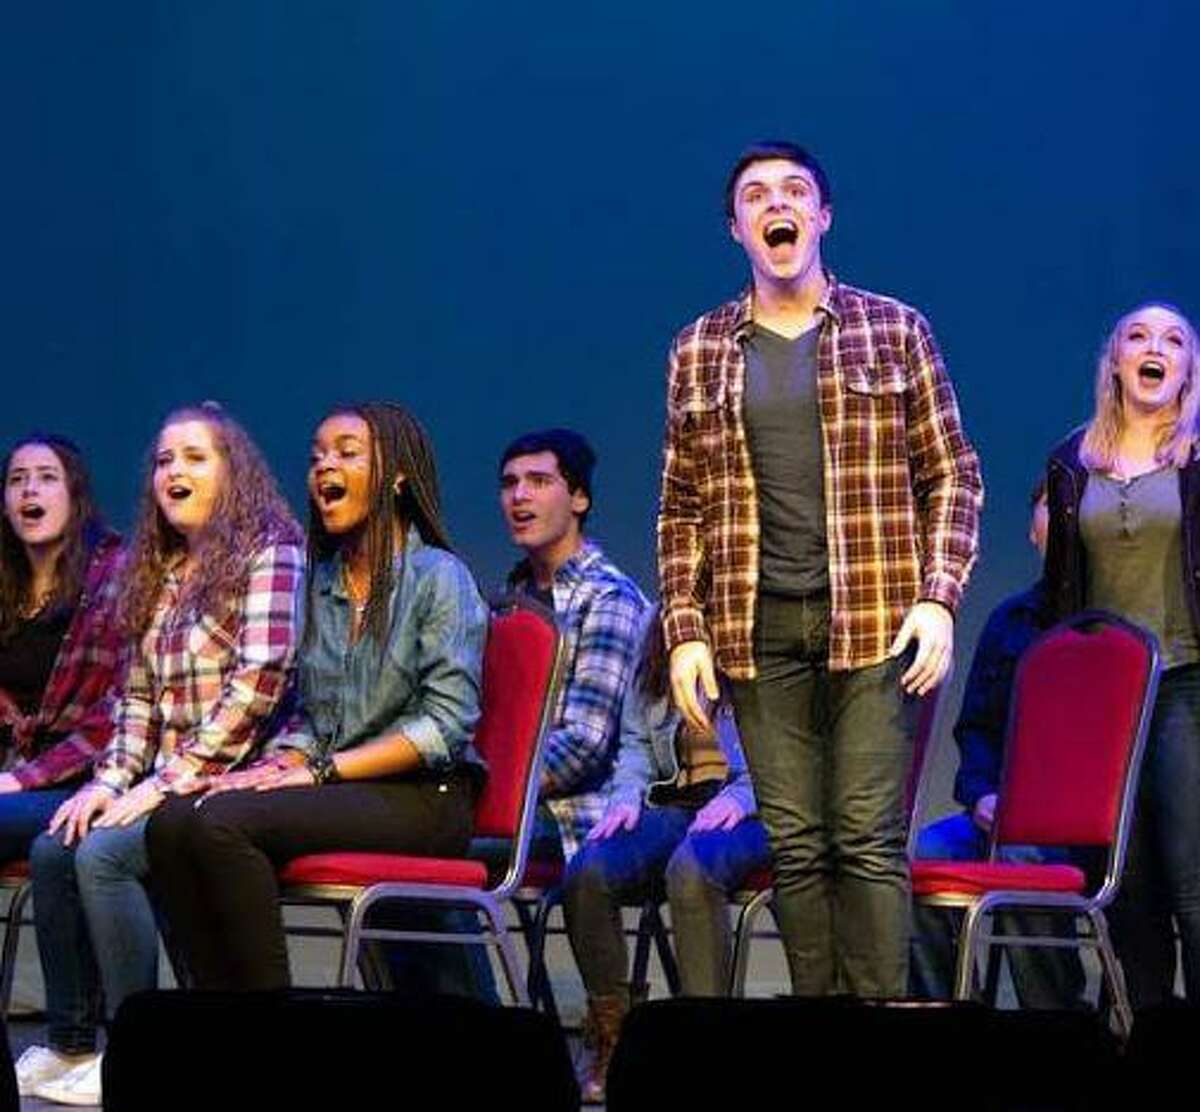 The Teen Musical Theatre Workshop at Center Stage will be presenting “One Moment in Time” at the theatre beginning this weekend.